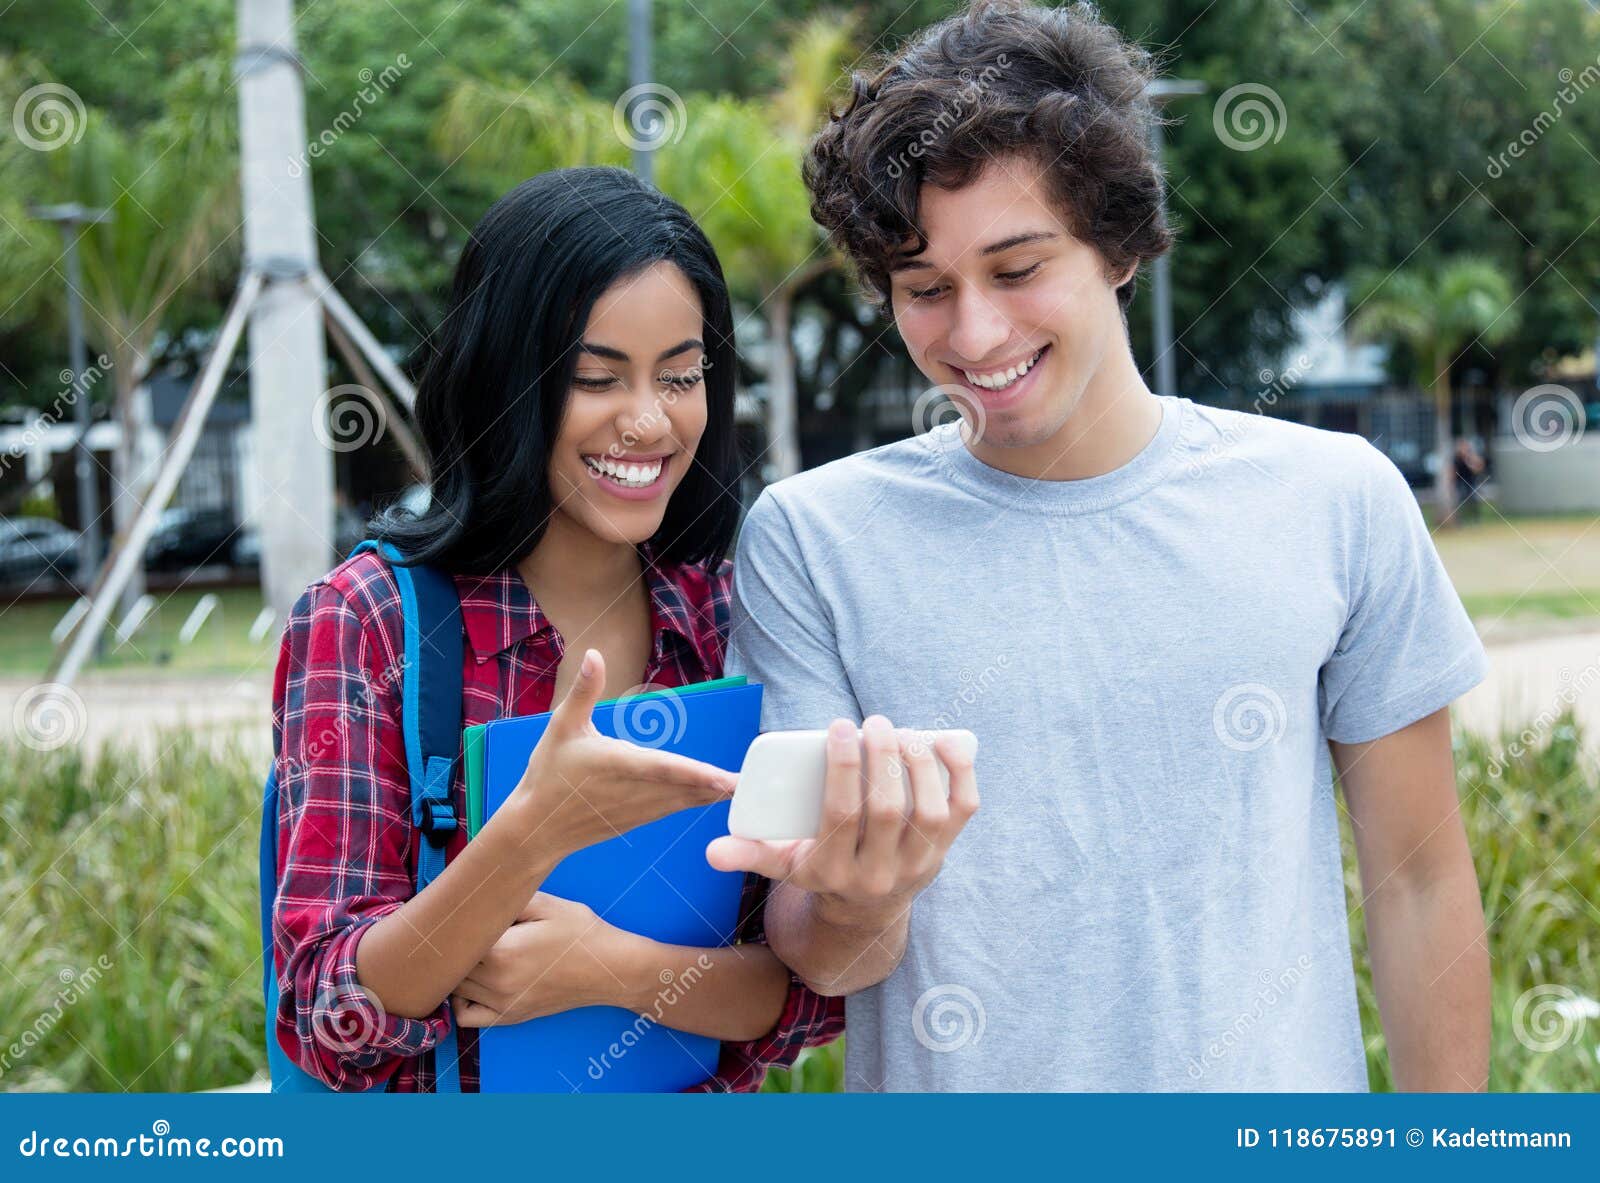 couple aof young adults watching movie on mobile phone